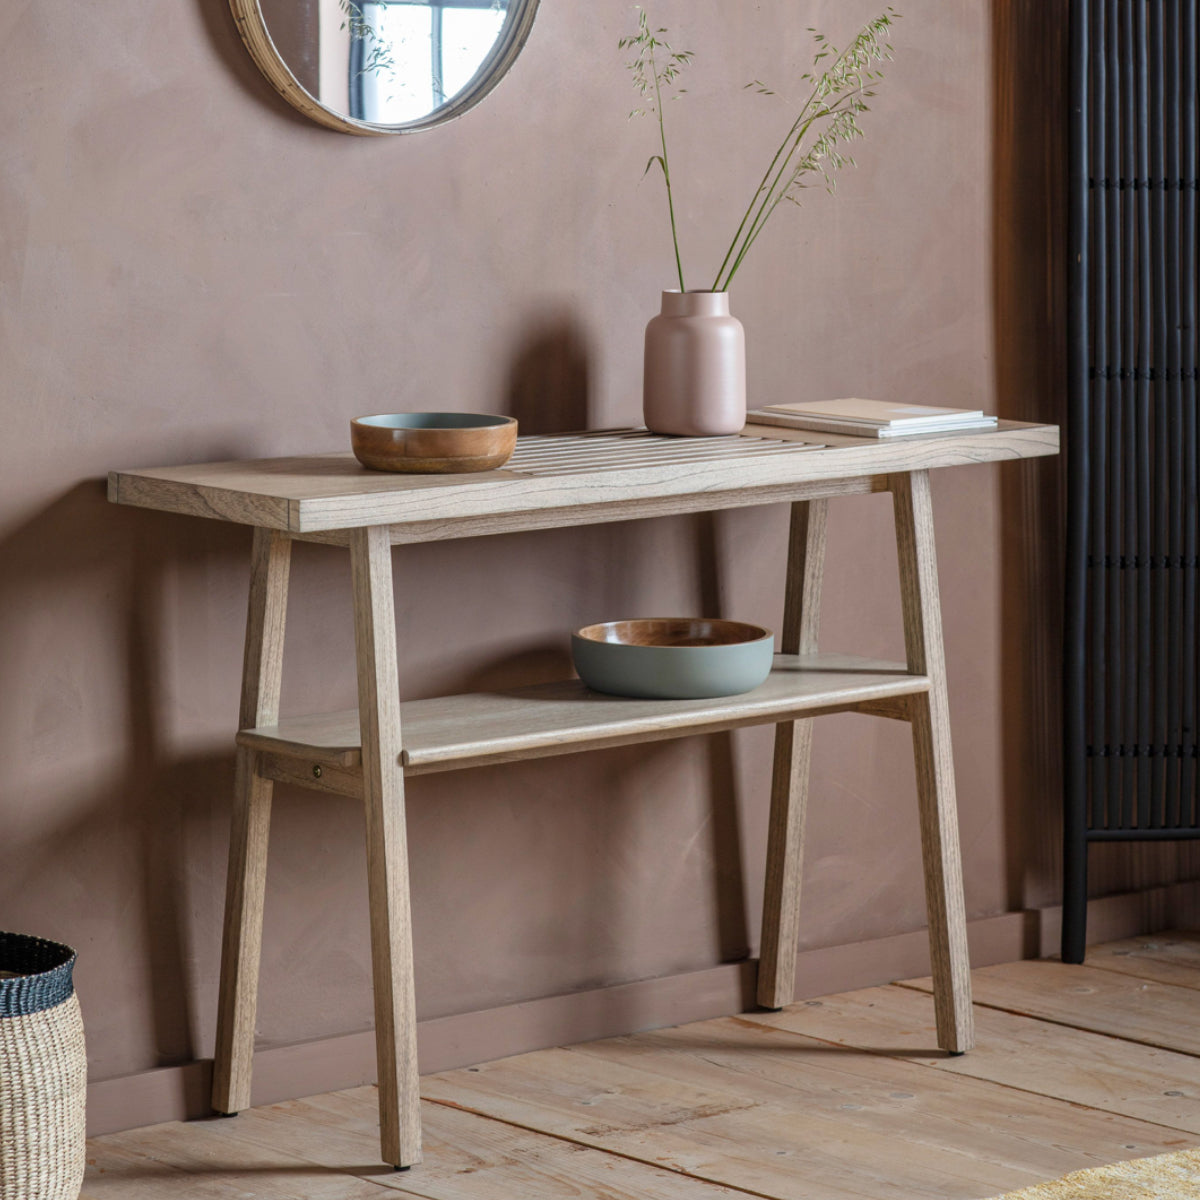 Slatted Top Wooden Console Table - The Farthing